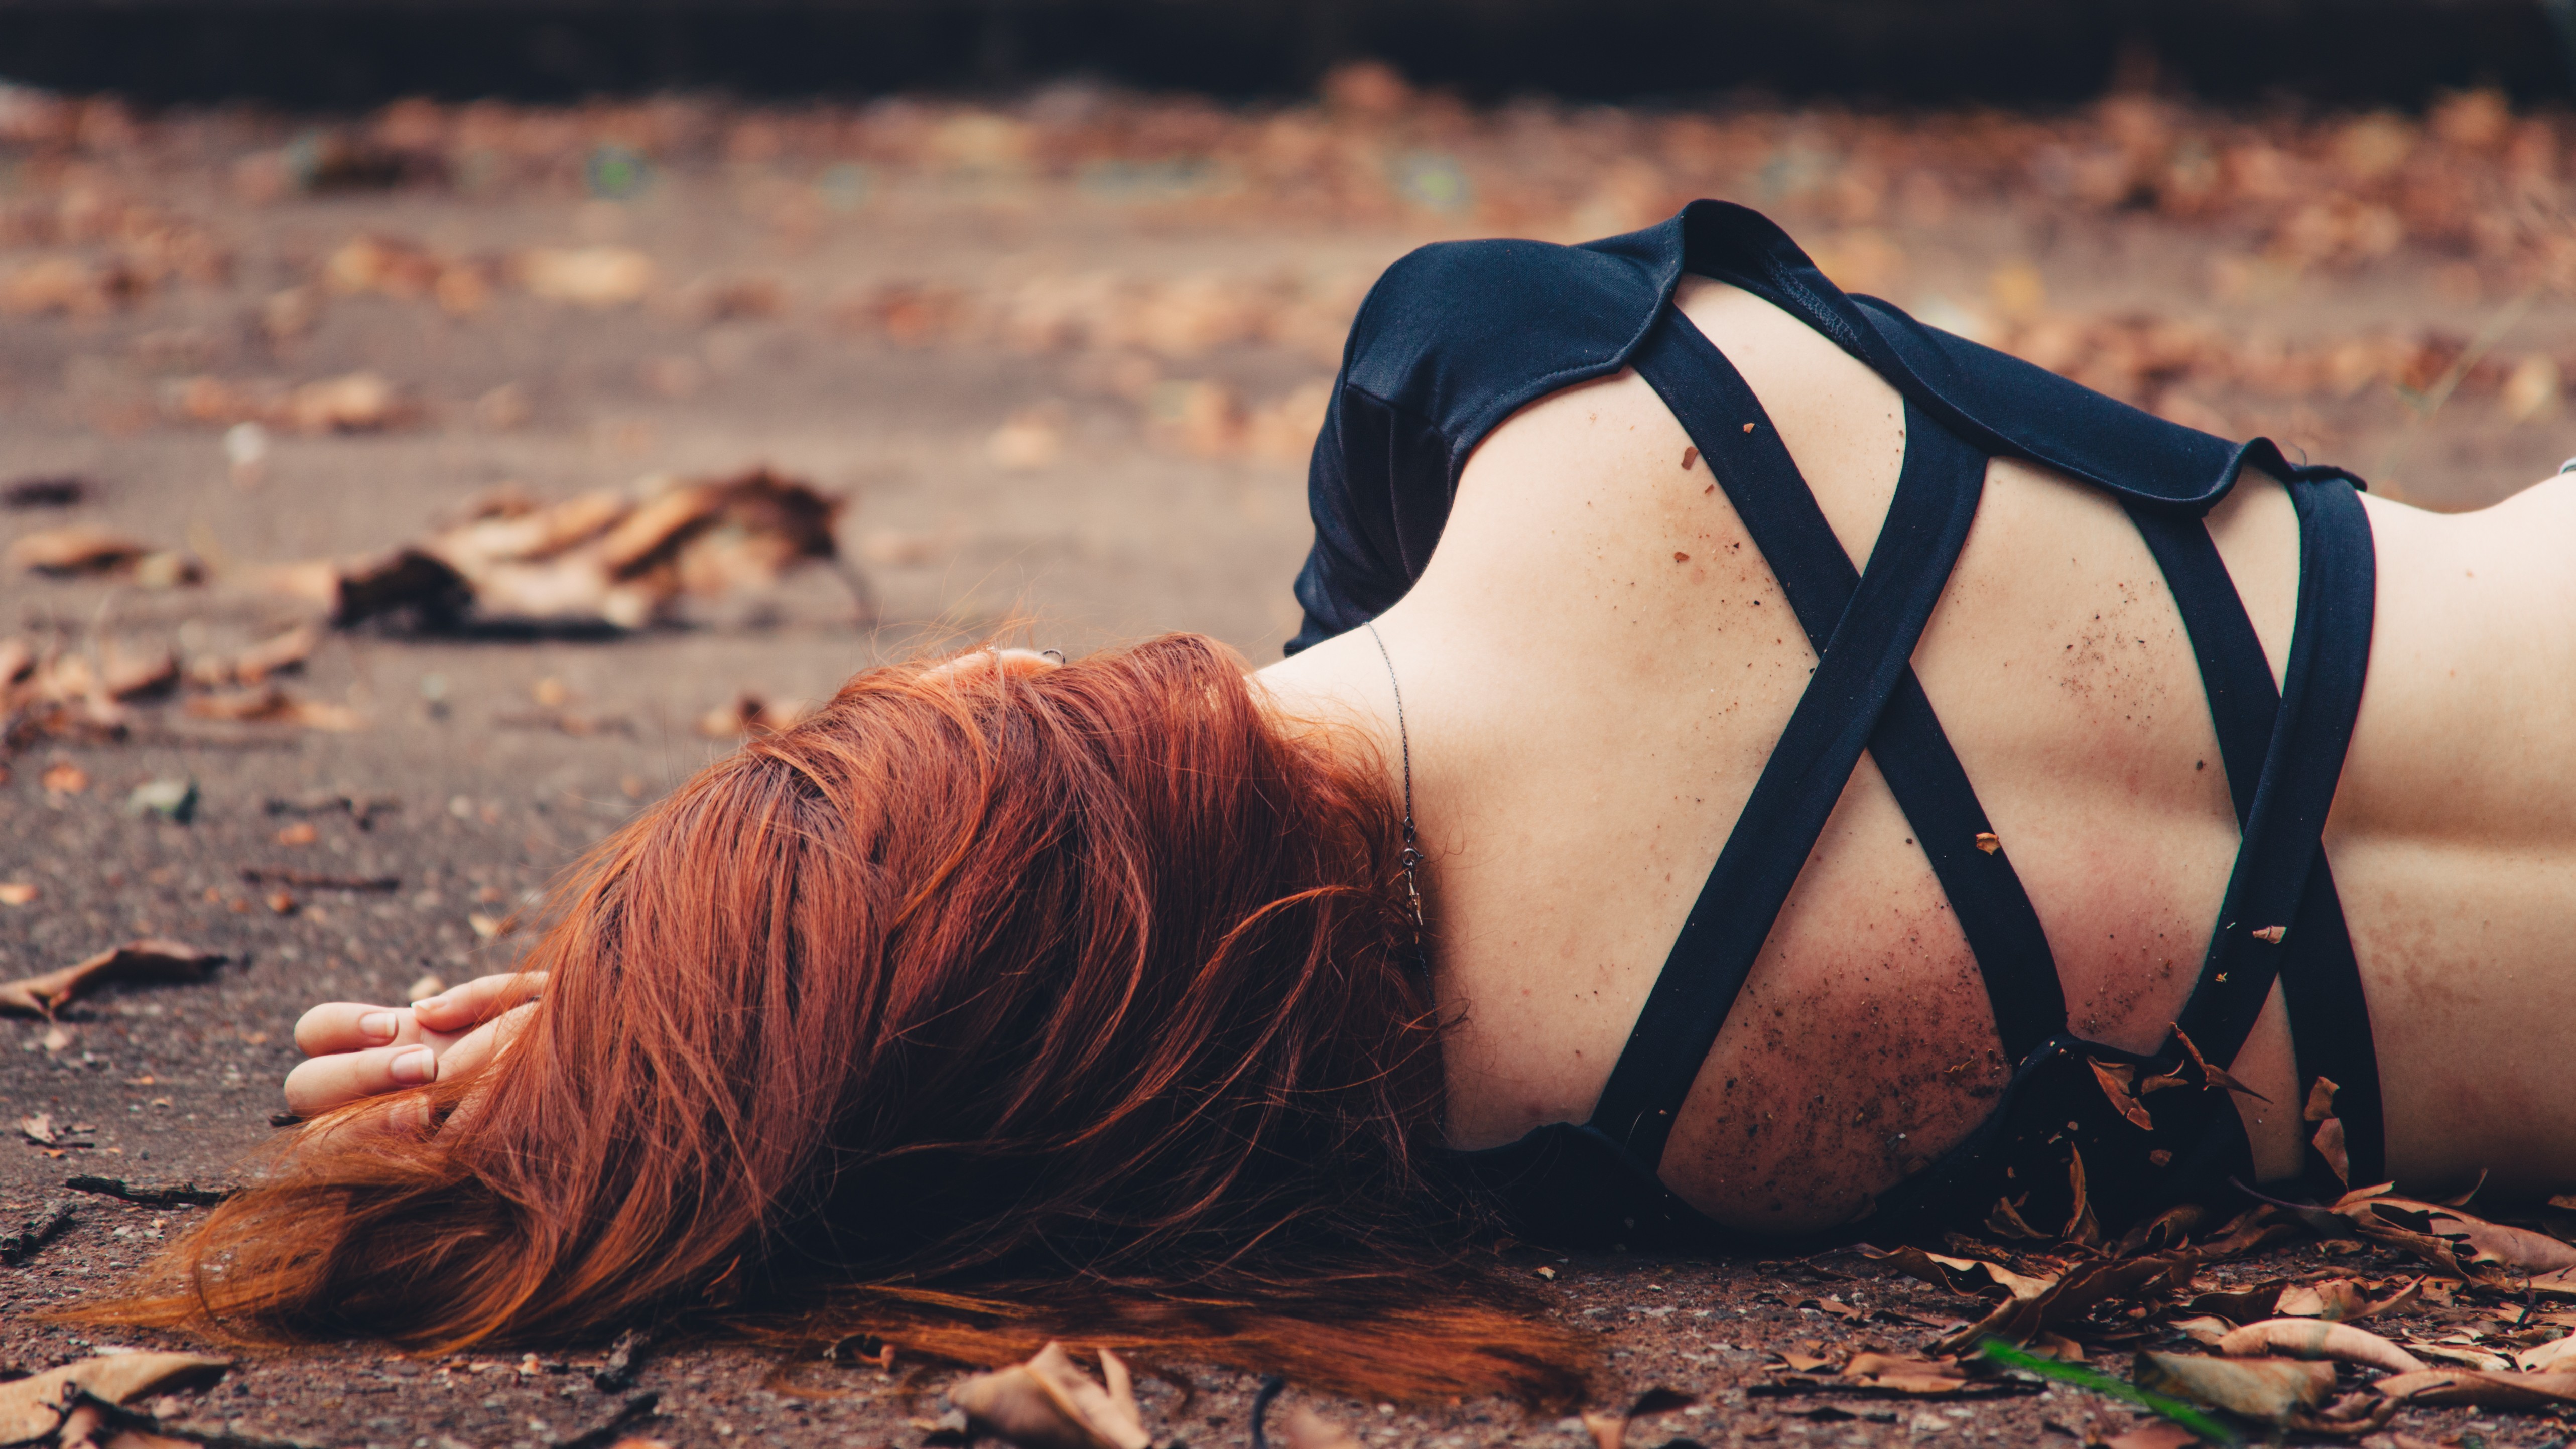 People 5132x2887 women model redhead long hair lying down ground leaves fall rear view dirty black outfits necklace on the ground lying on side depth of field outdoors women outdoors